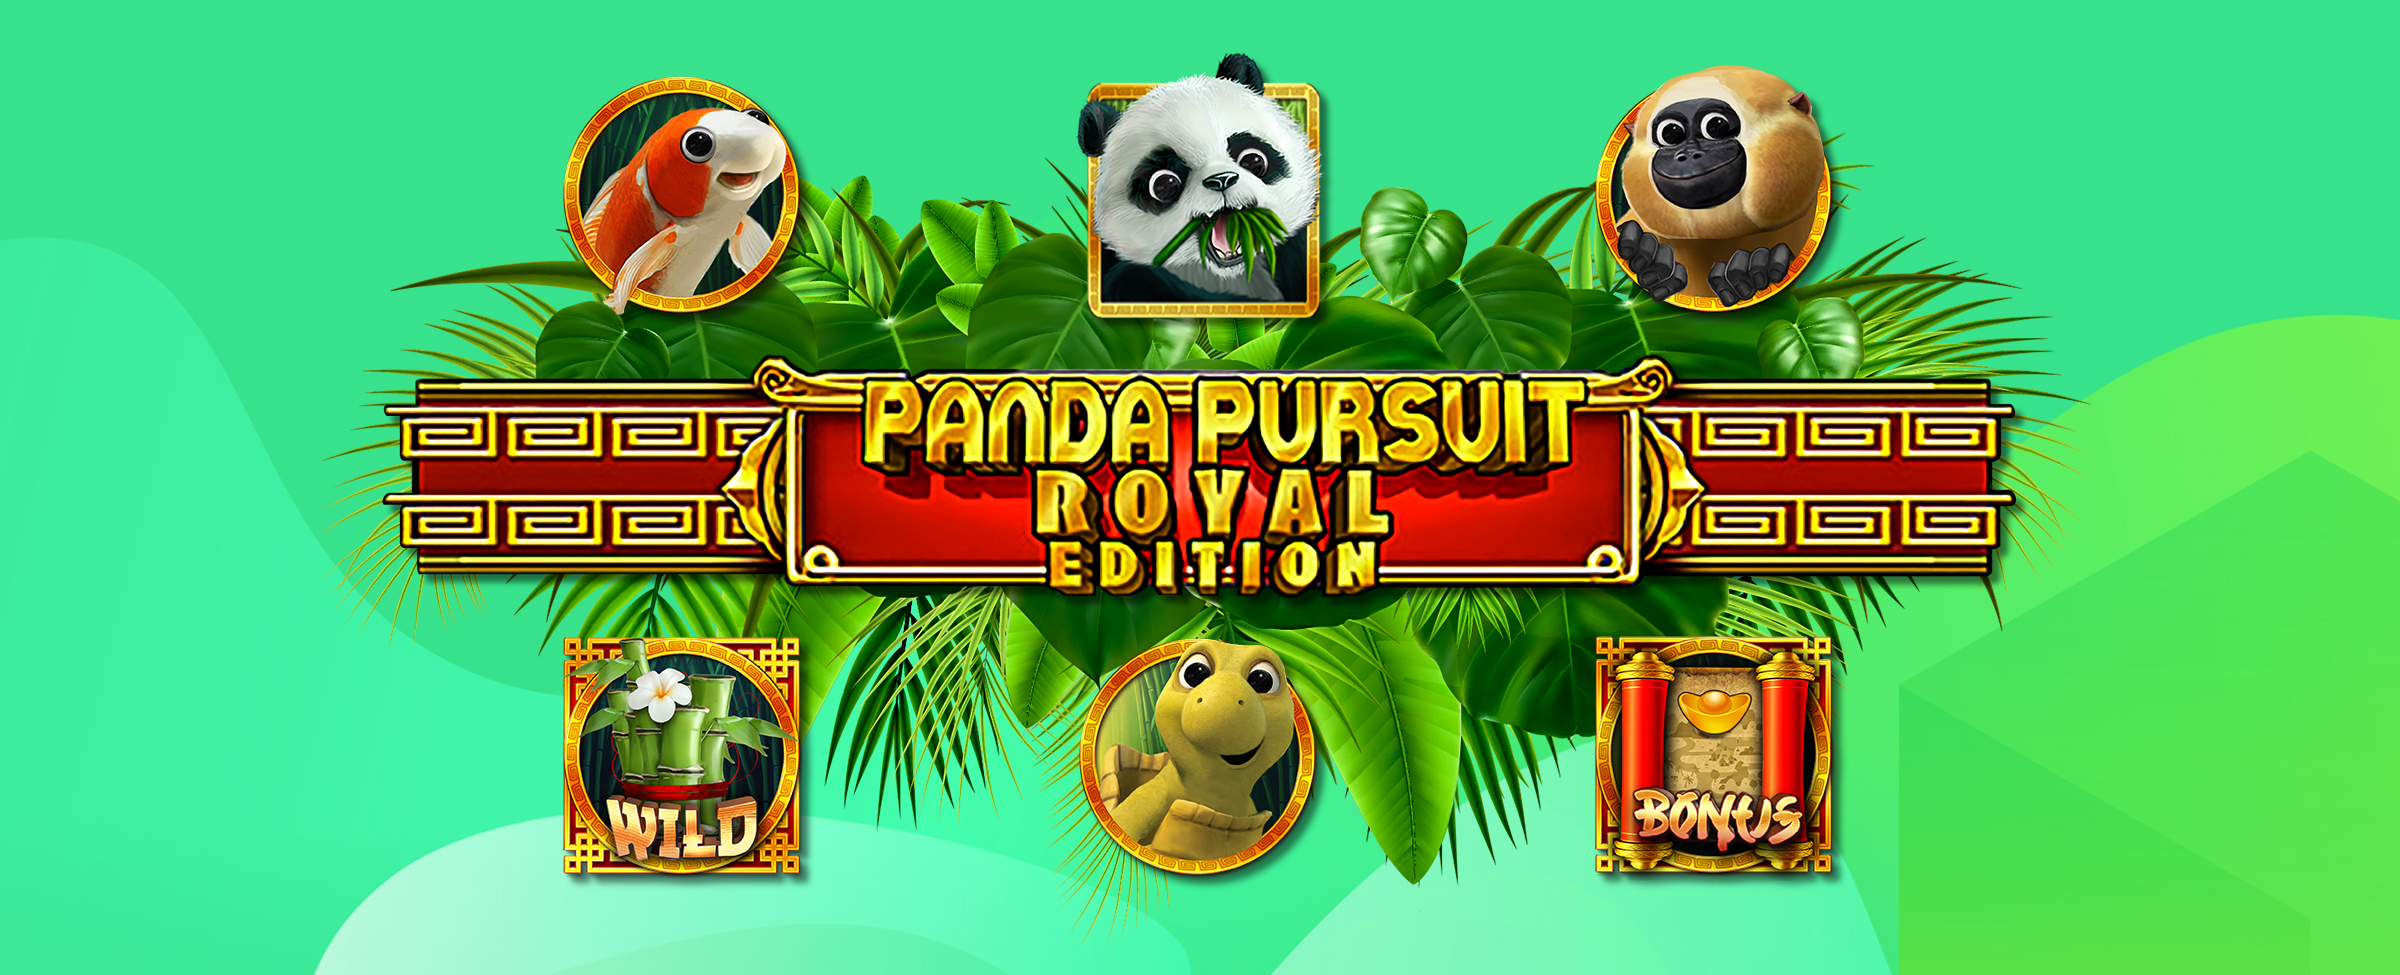 Free spins. Wild multipliers. Re-triggers. Need we say more about Panda Pursuit’s royal features?